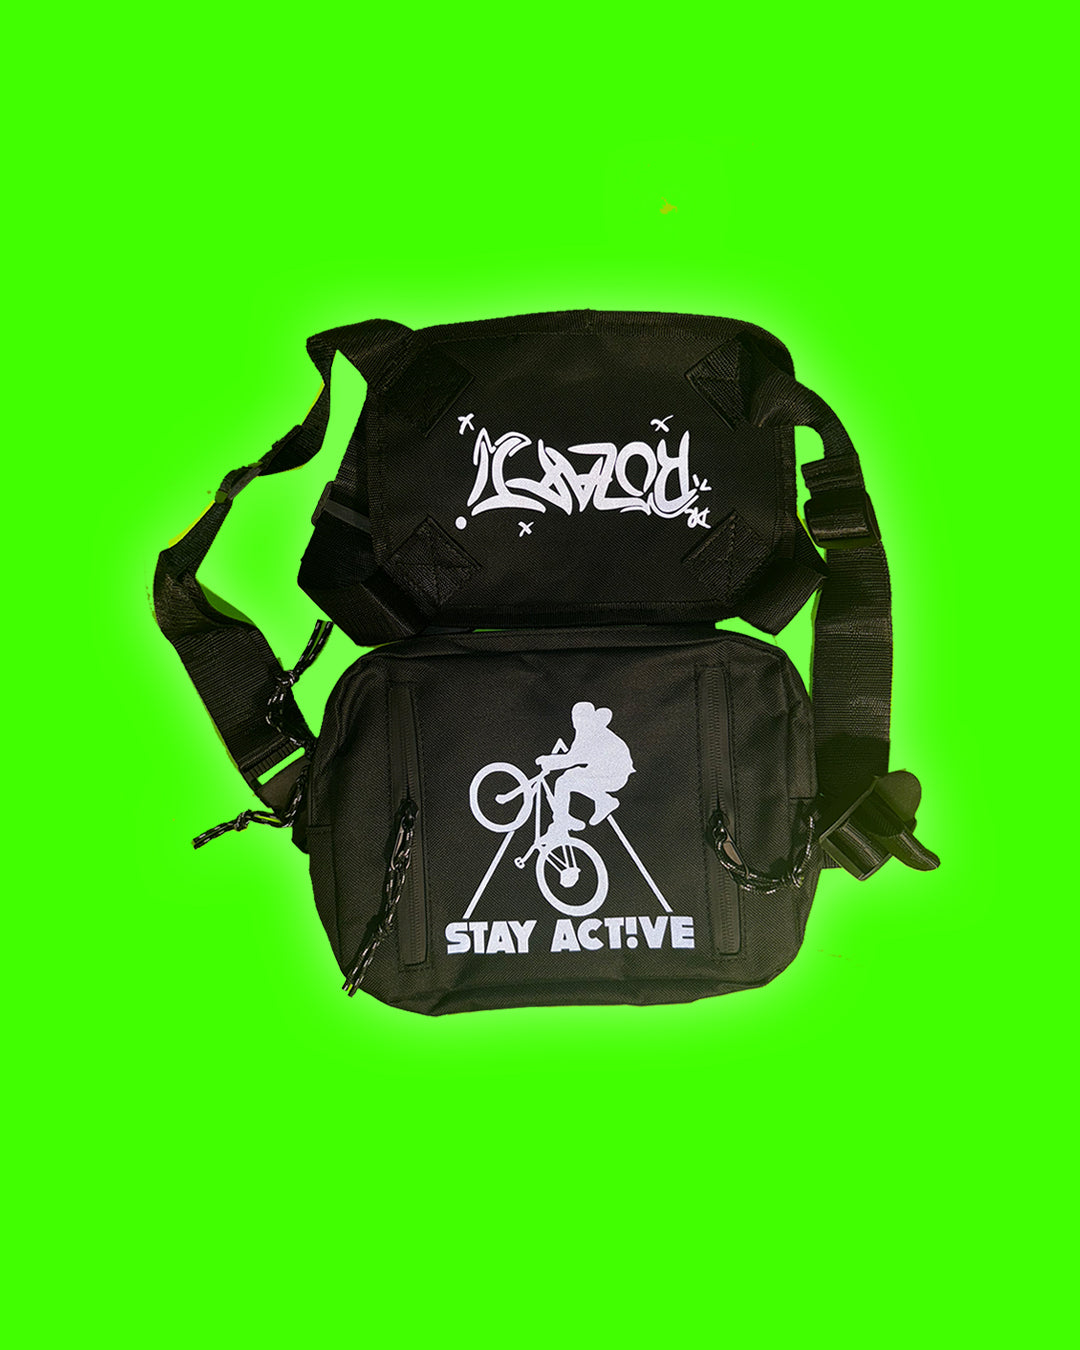 Stay Active Chestbag  (white reflective)